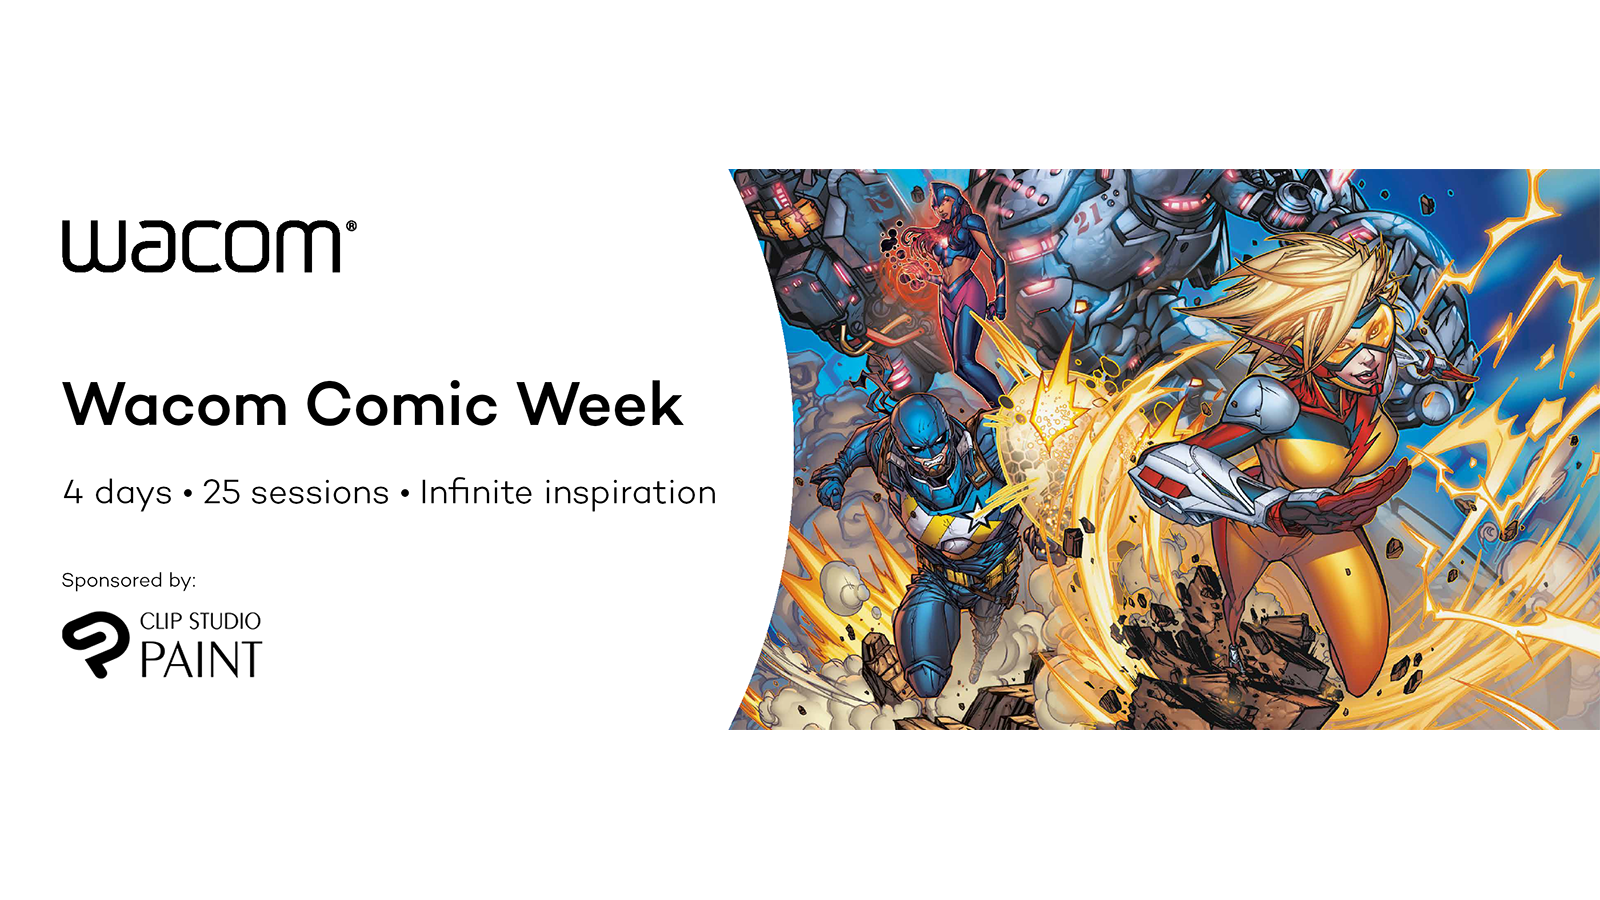 Online event “Comic Week”: Wacom and Celsys Celebrate Infinite Inspiration with 4-Day Online Event